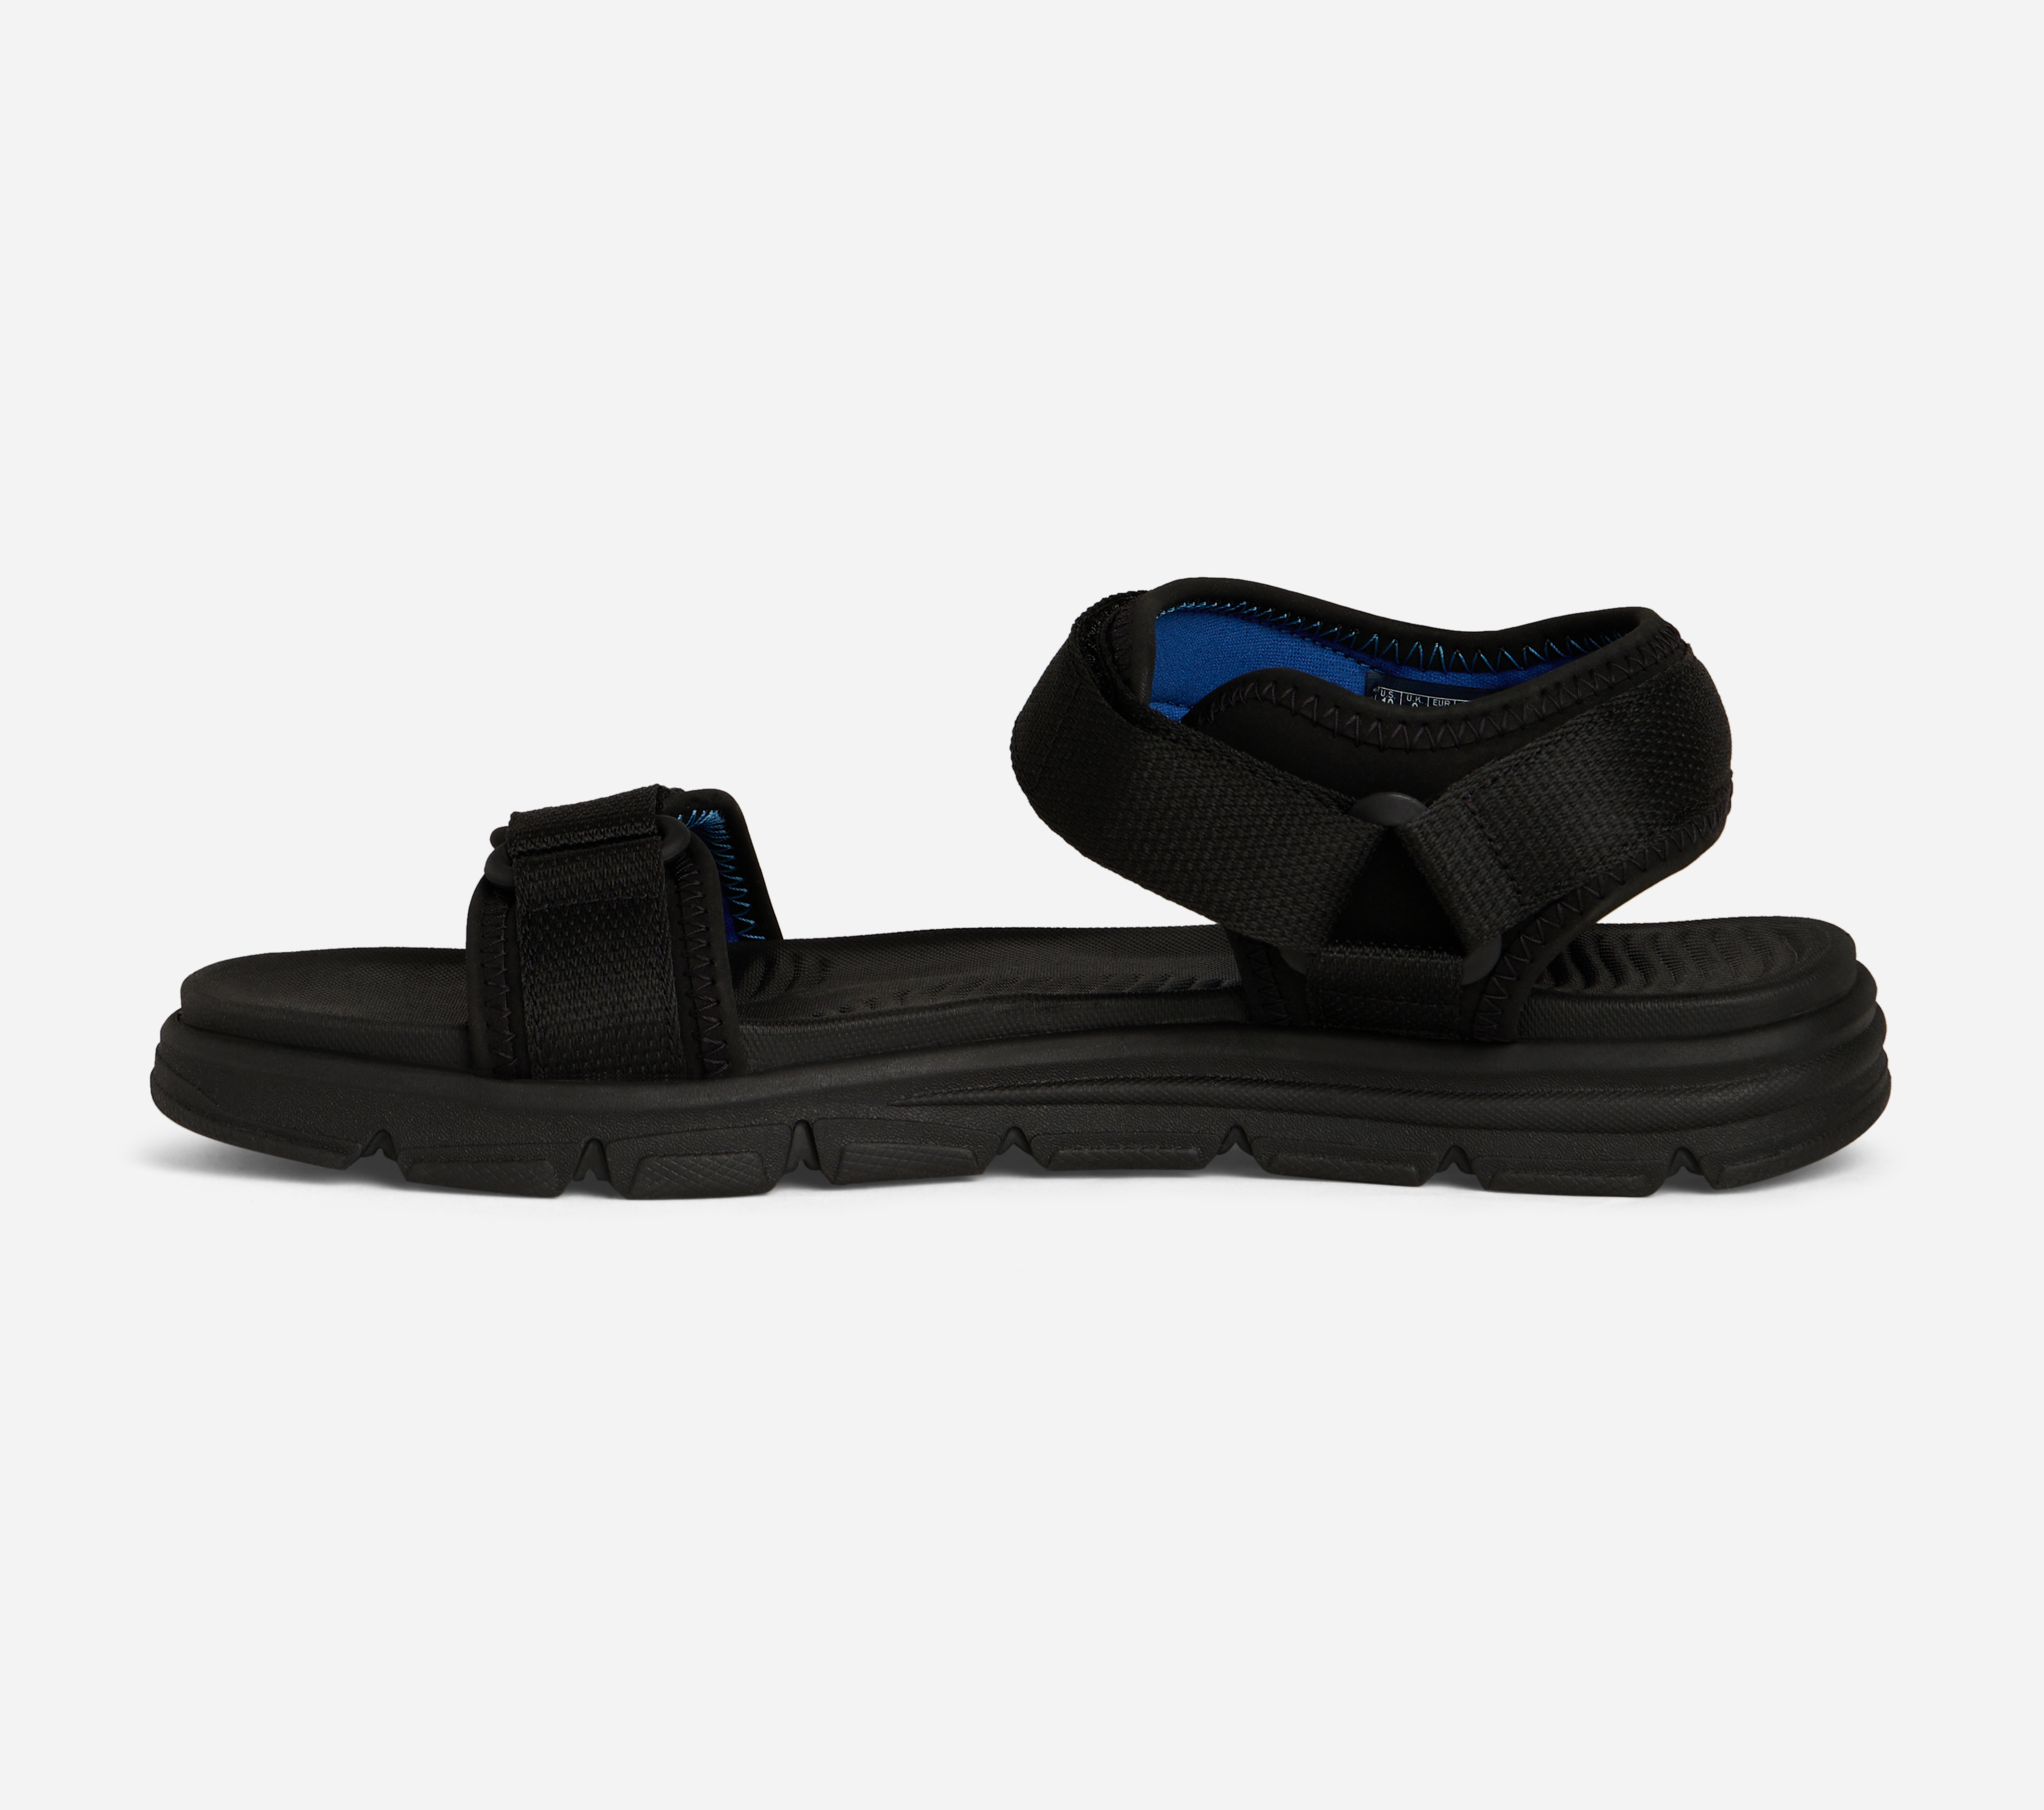 WIND SWELL - SWELL SWIFT, BLACK/BLUE Footwear Lateral View